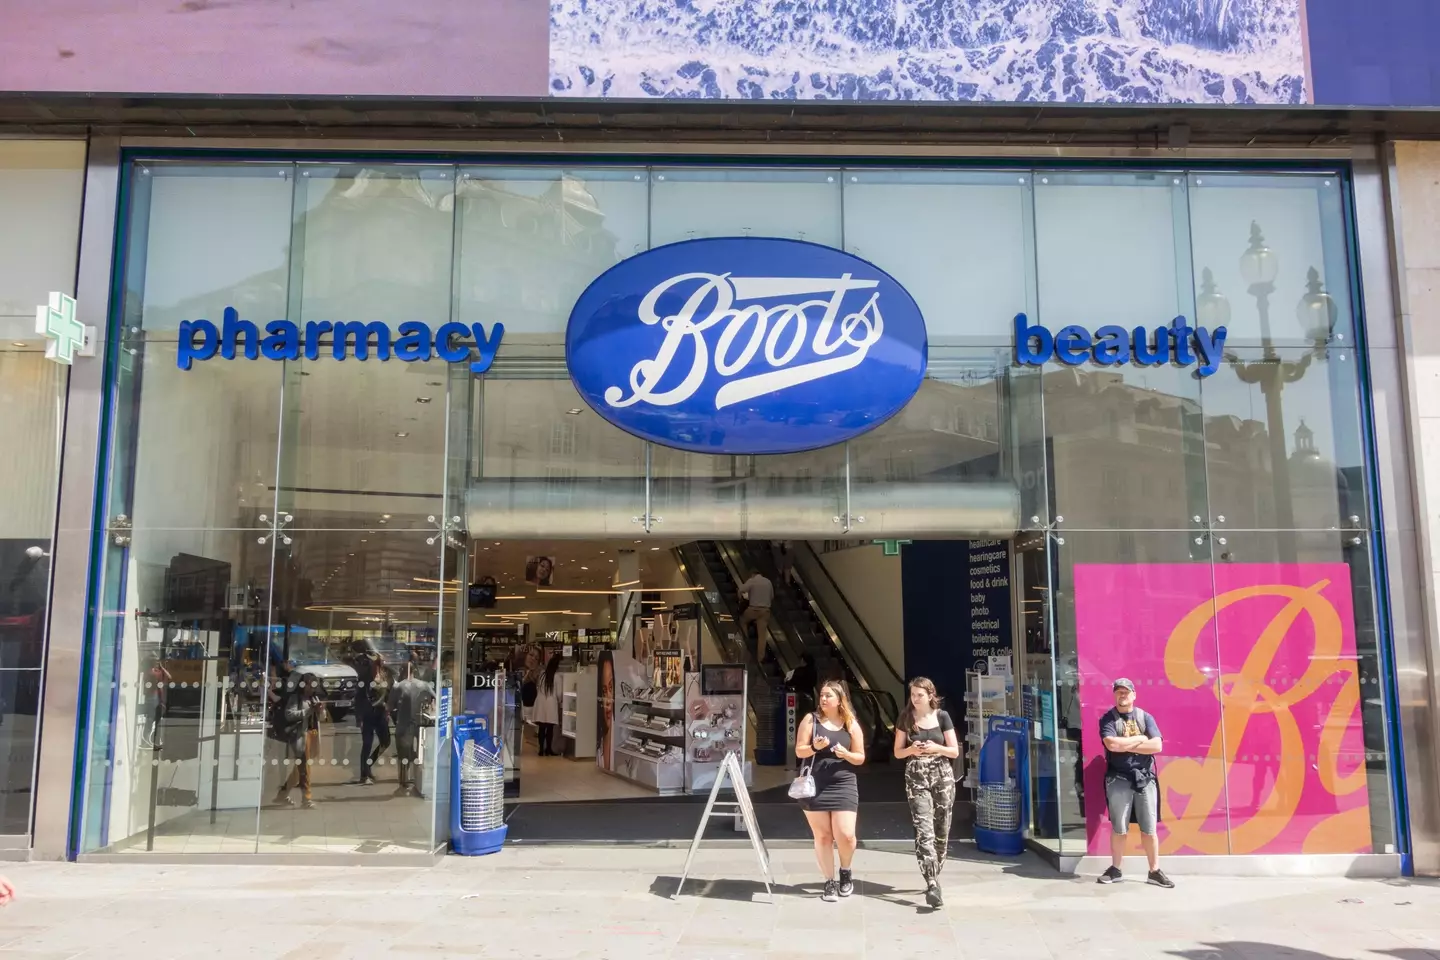 Boots said it is 'proud' of the change. (